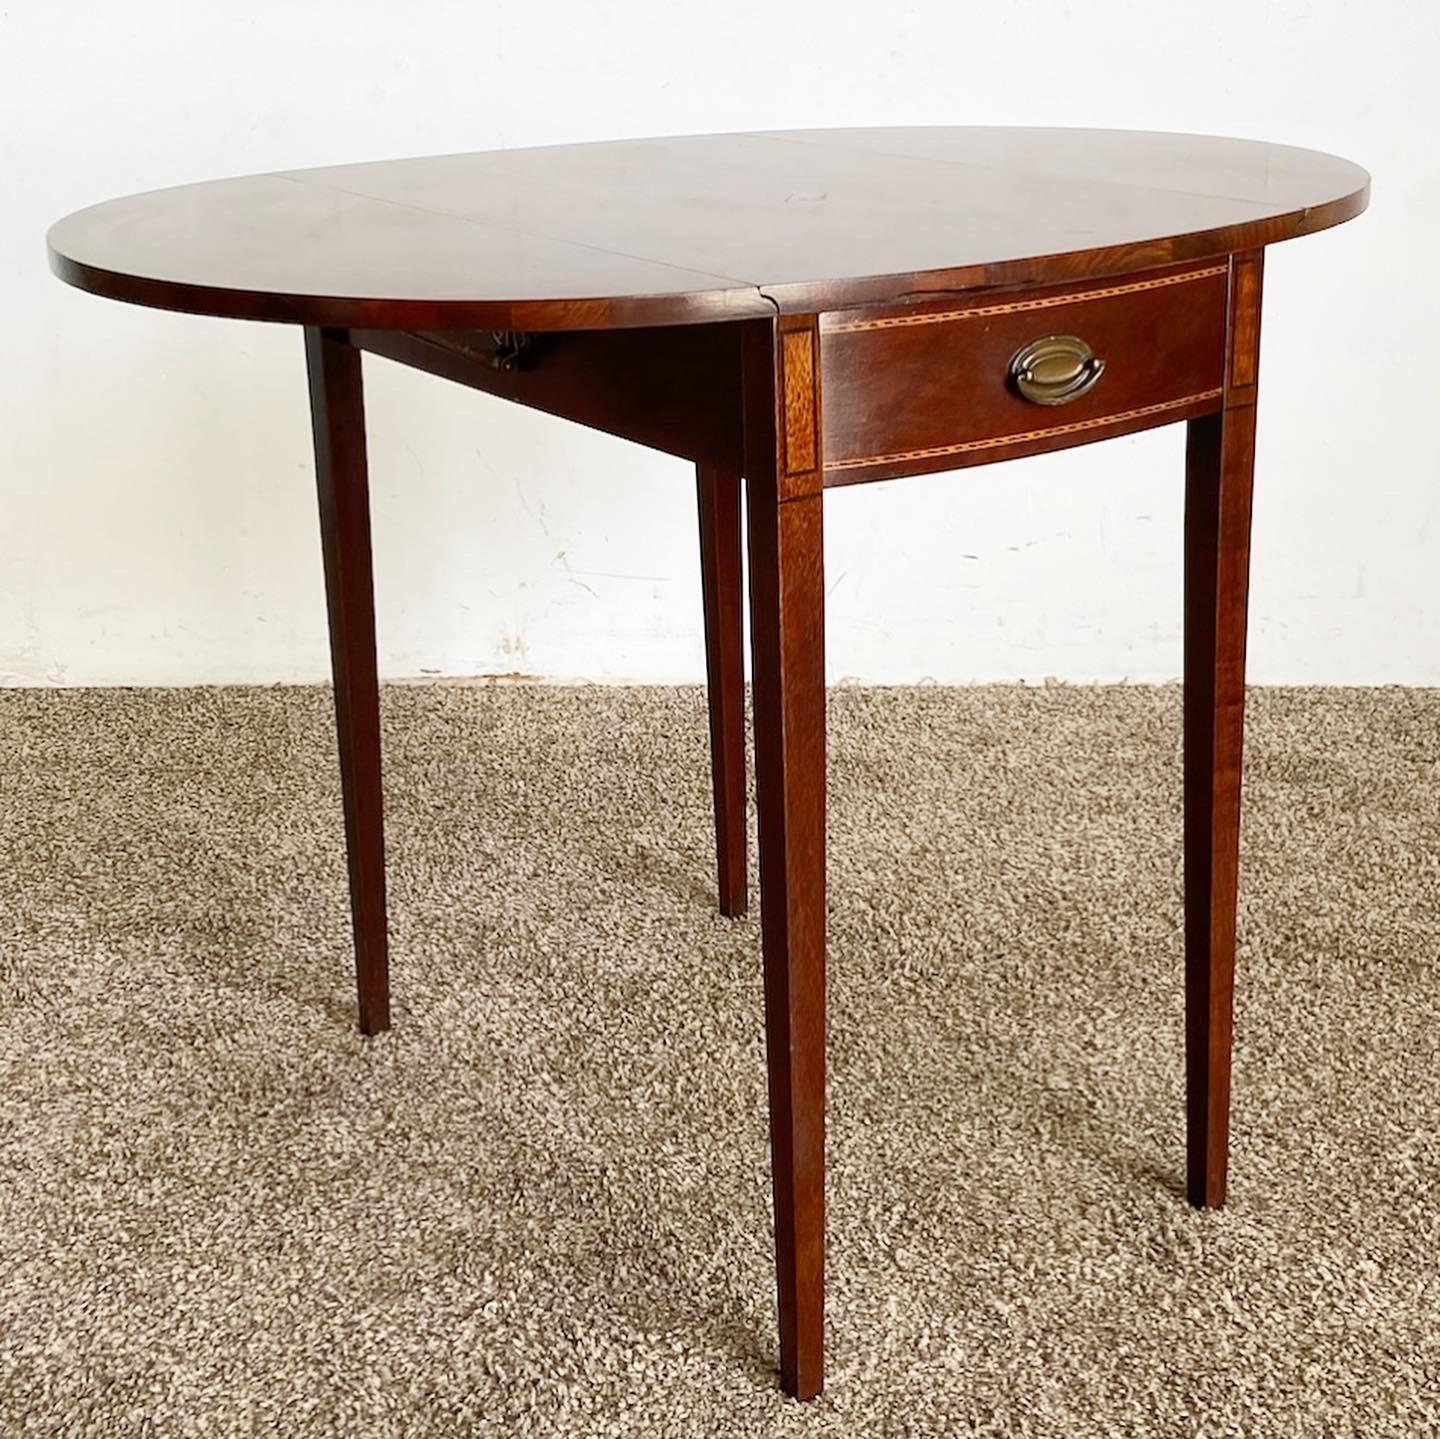 Enhance your space with the exceptional vintage Hepplewhite drop leaf table by Mersman. This table features an ornate urn-shaped design and two drop leaf sides, combining elegance and functionality. Closes to 17.5”W

Exceptional vintage Hepplewhite